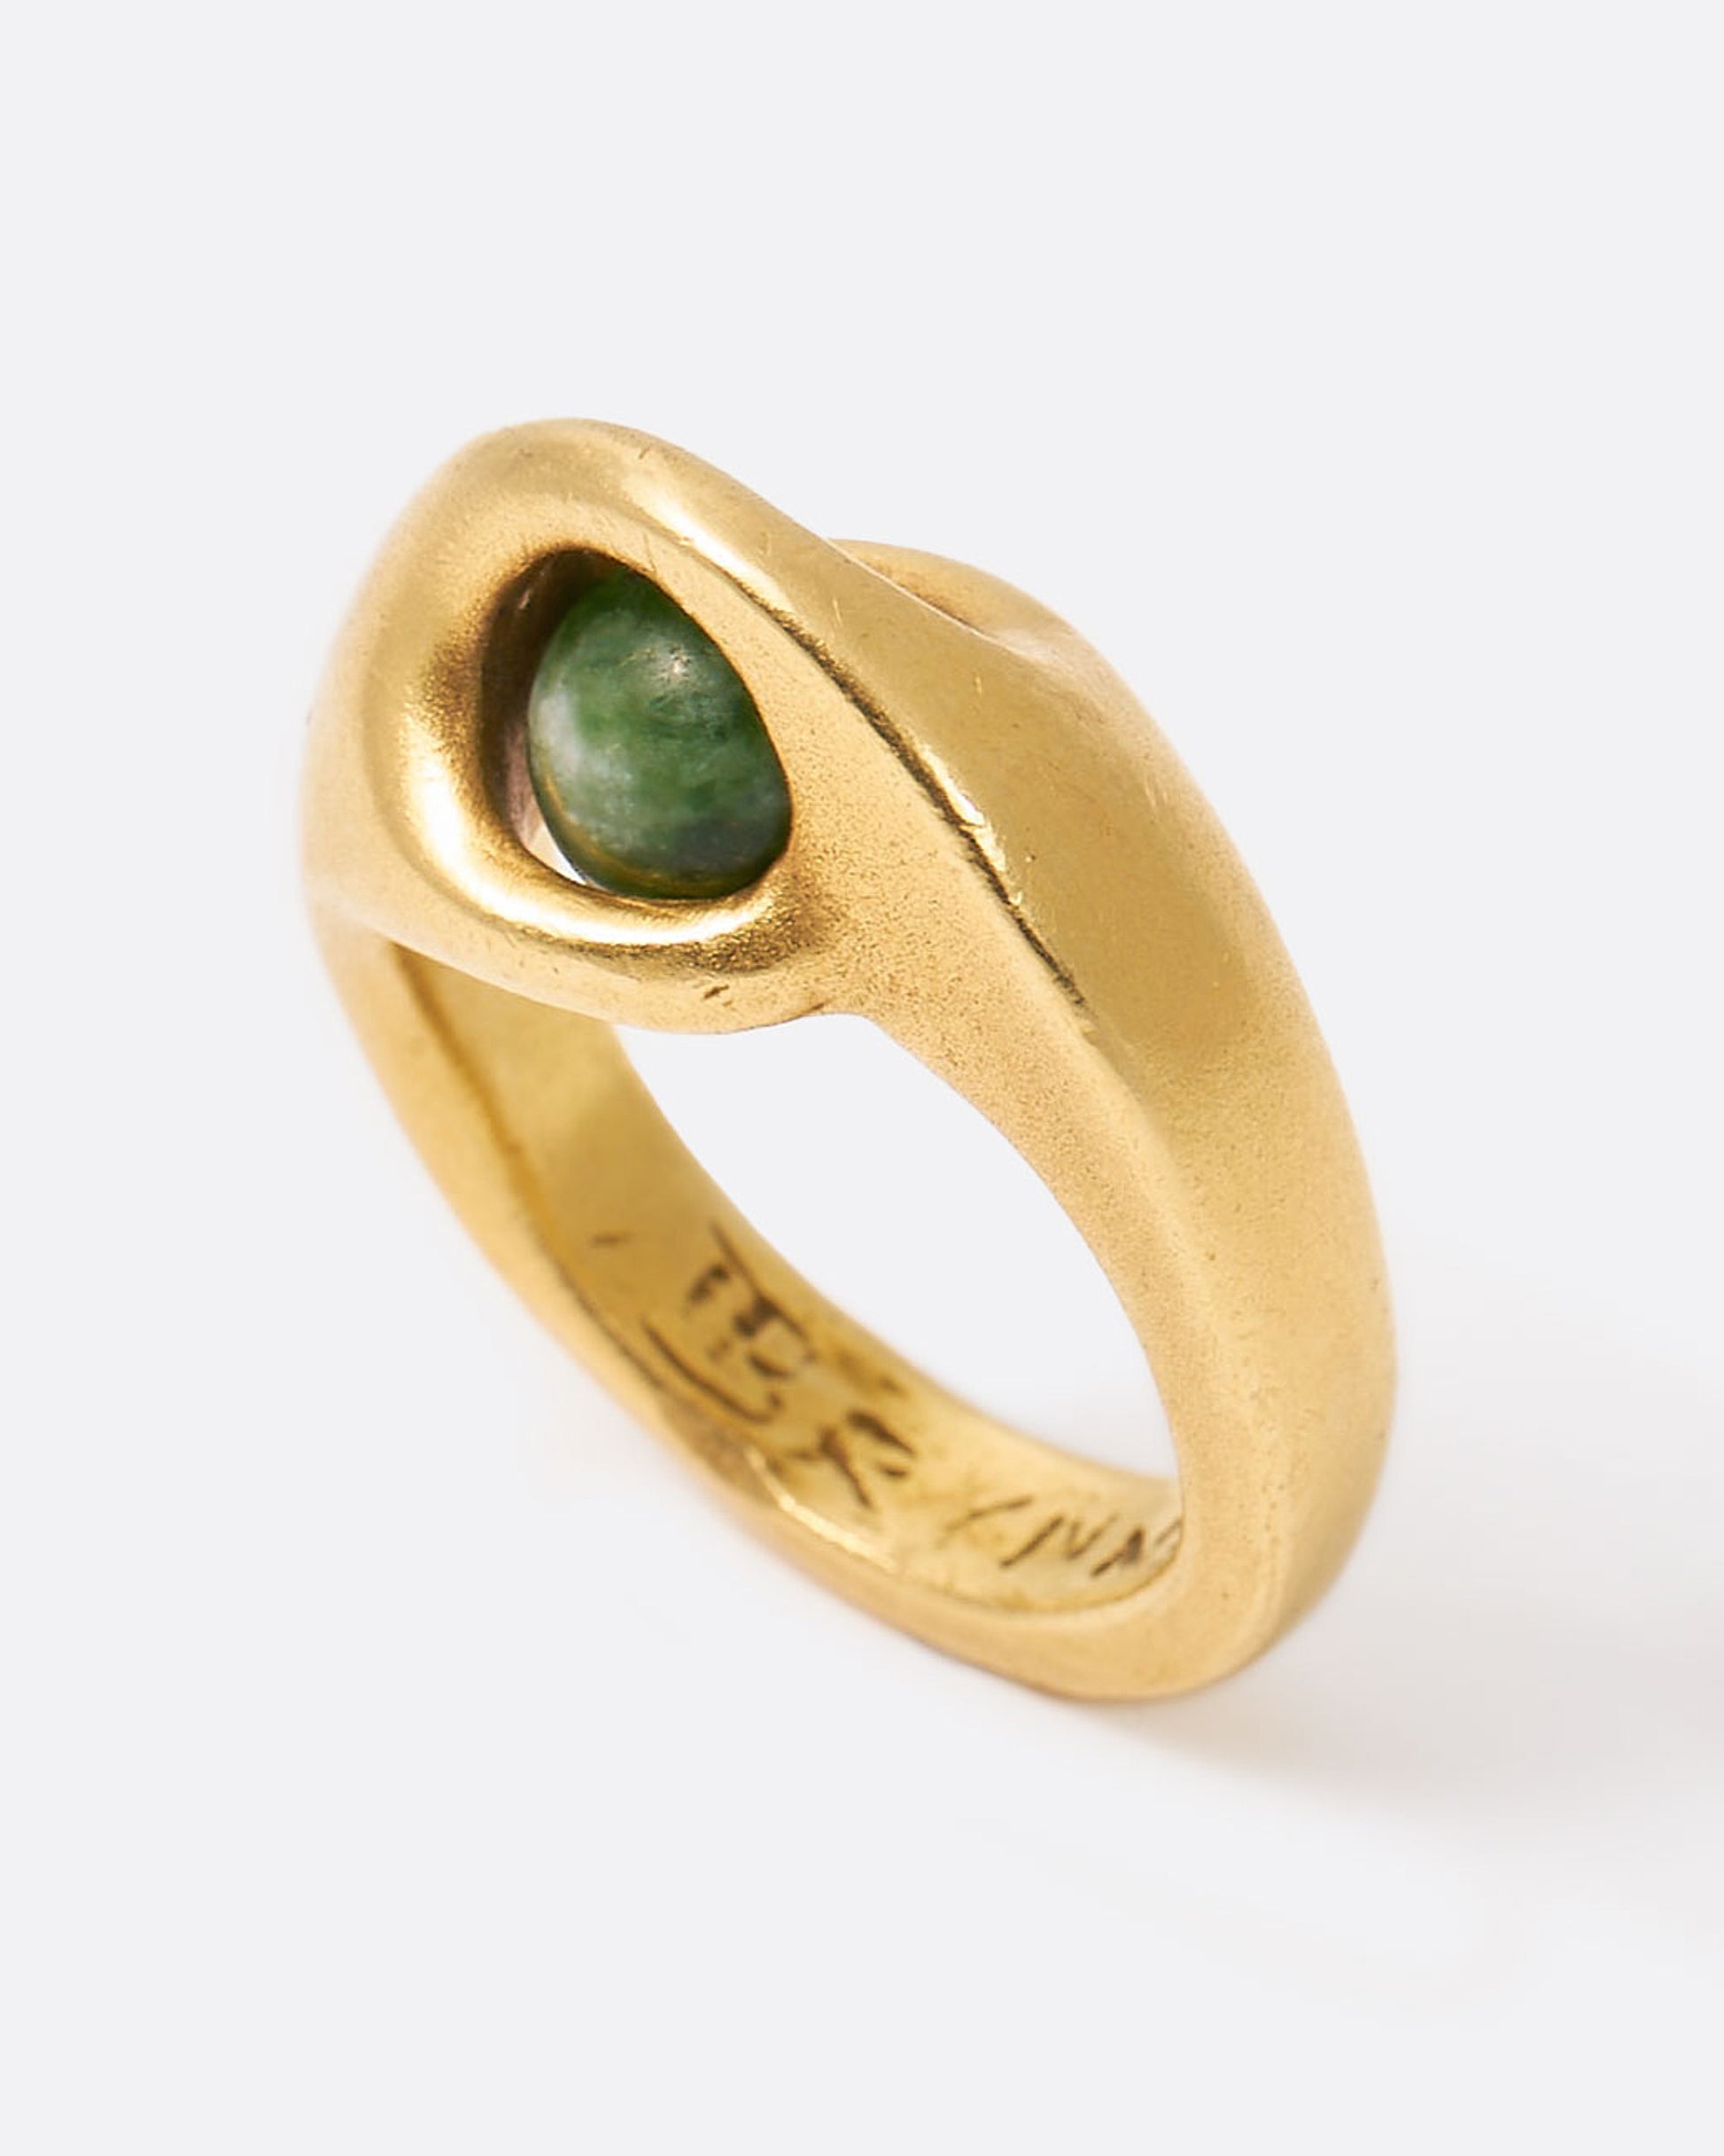 Yellow gold ring with floating green sodalite sphere, shown from the top.